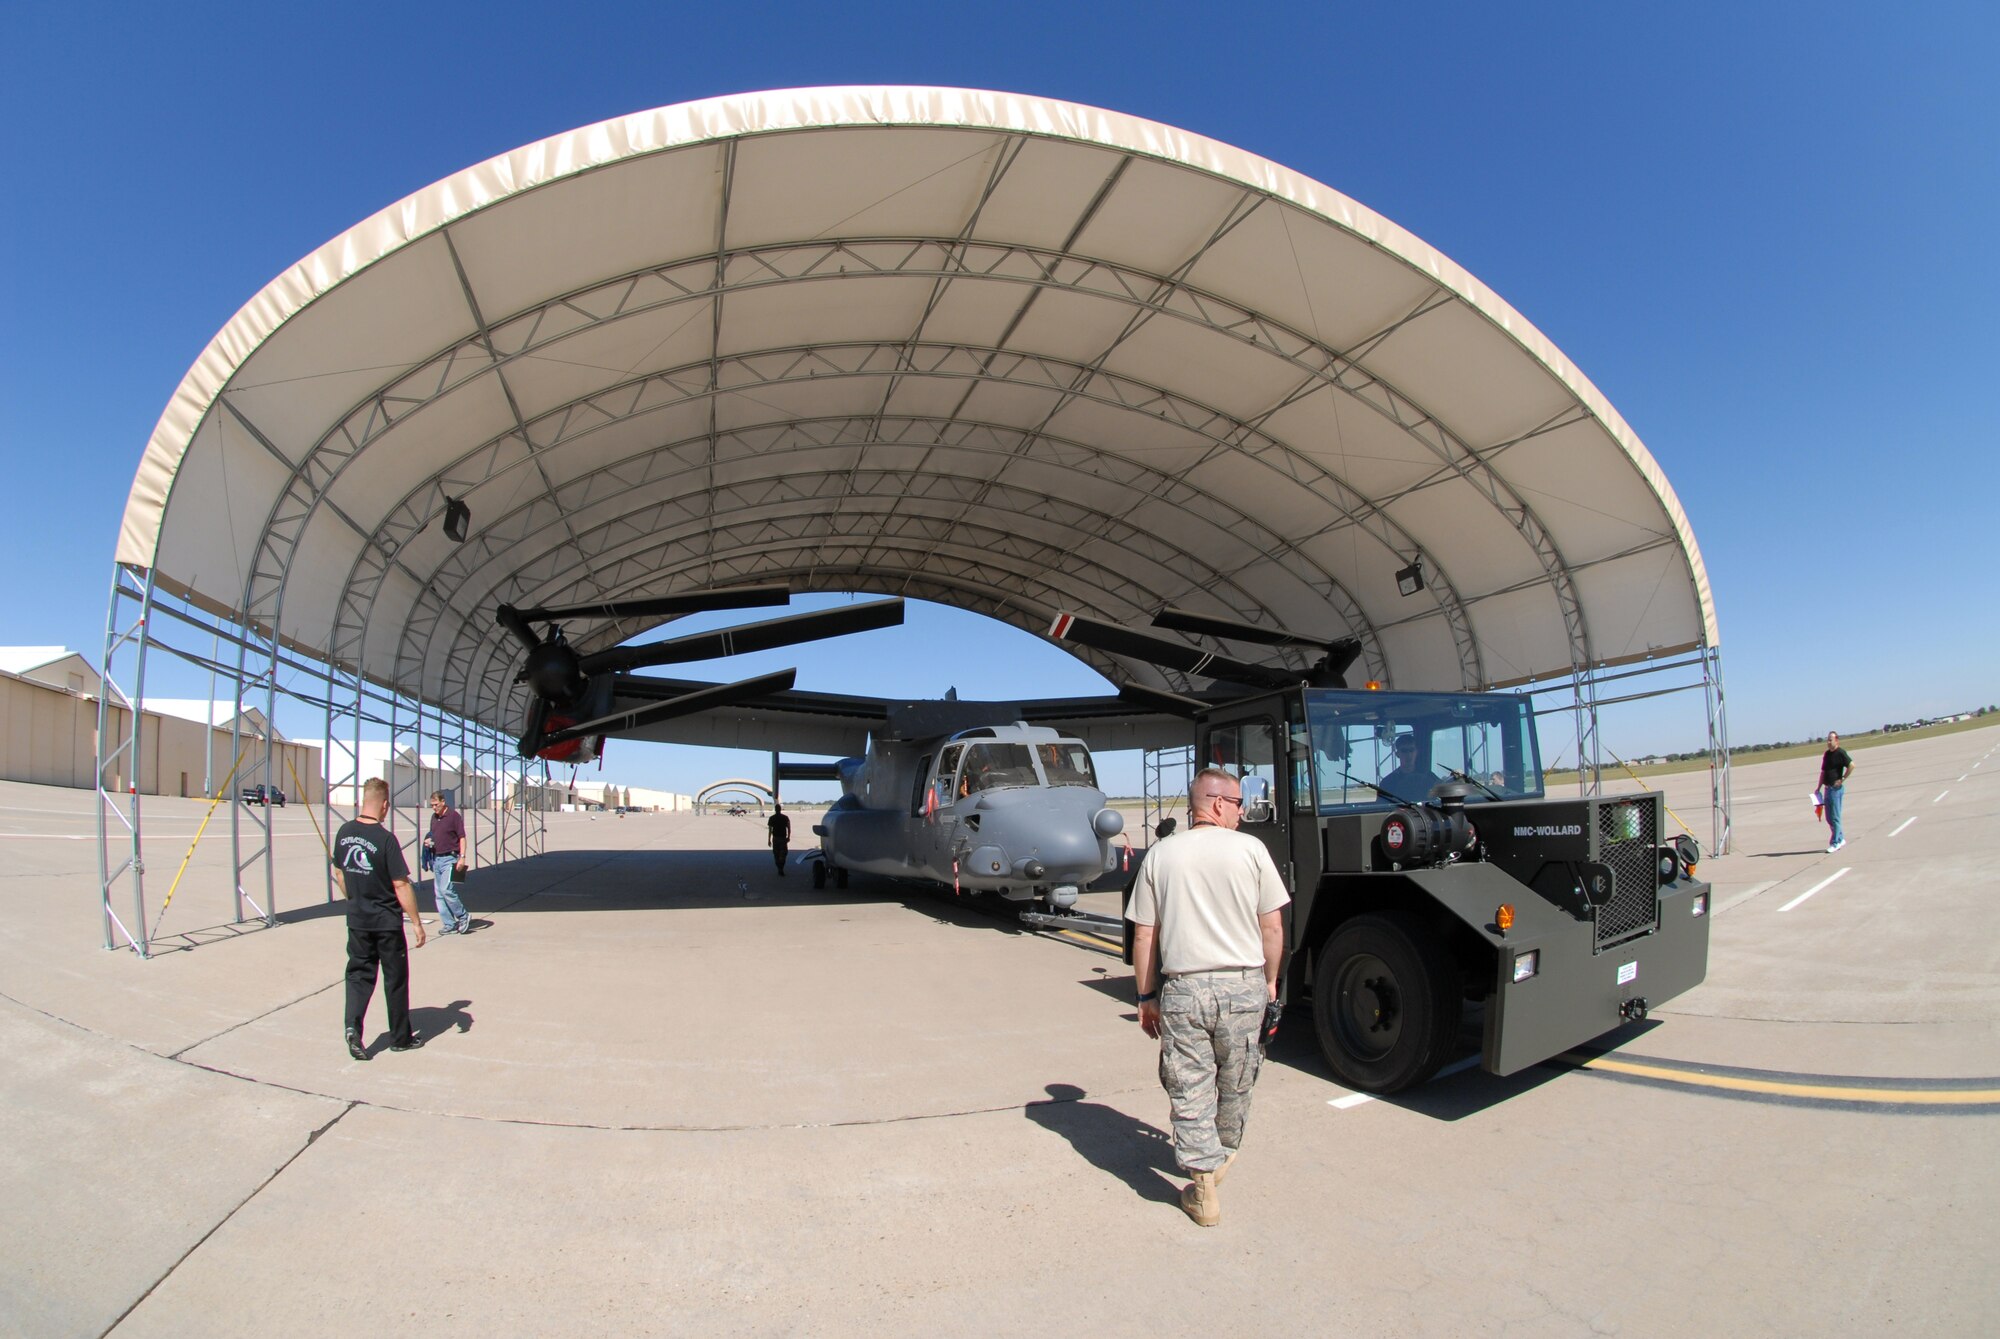 CANNON AIR FORCE BASE, N.M. -- Airmen check the fit of a CV-22 Osprey in a flight line sun shelter on Sept. 25, 2007.  Cannon AFB will be transferred from Air Combat Command to Air Force Special Operations Command on Oct. 1.  Ospreys are among the special operations aircraft to be assigned to the 27th Special Operations Wing at Cannon.  The wing, formerly designated the 27th Fighter Wing, operated F-16 Fighting Falcons at the base from 1995 to 2007.  (Air Force photo by Chief Master Sgt. Gary Emery)